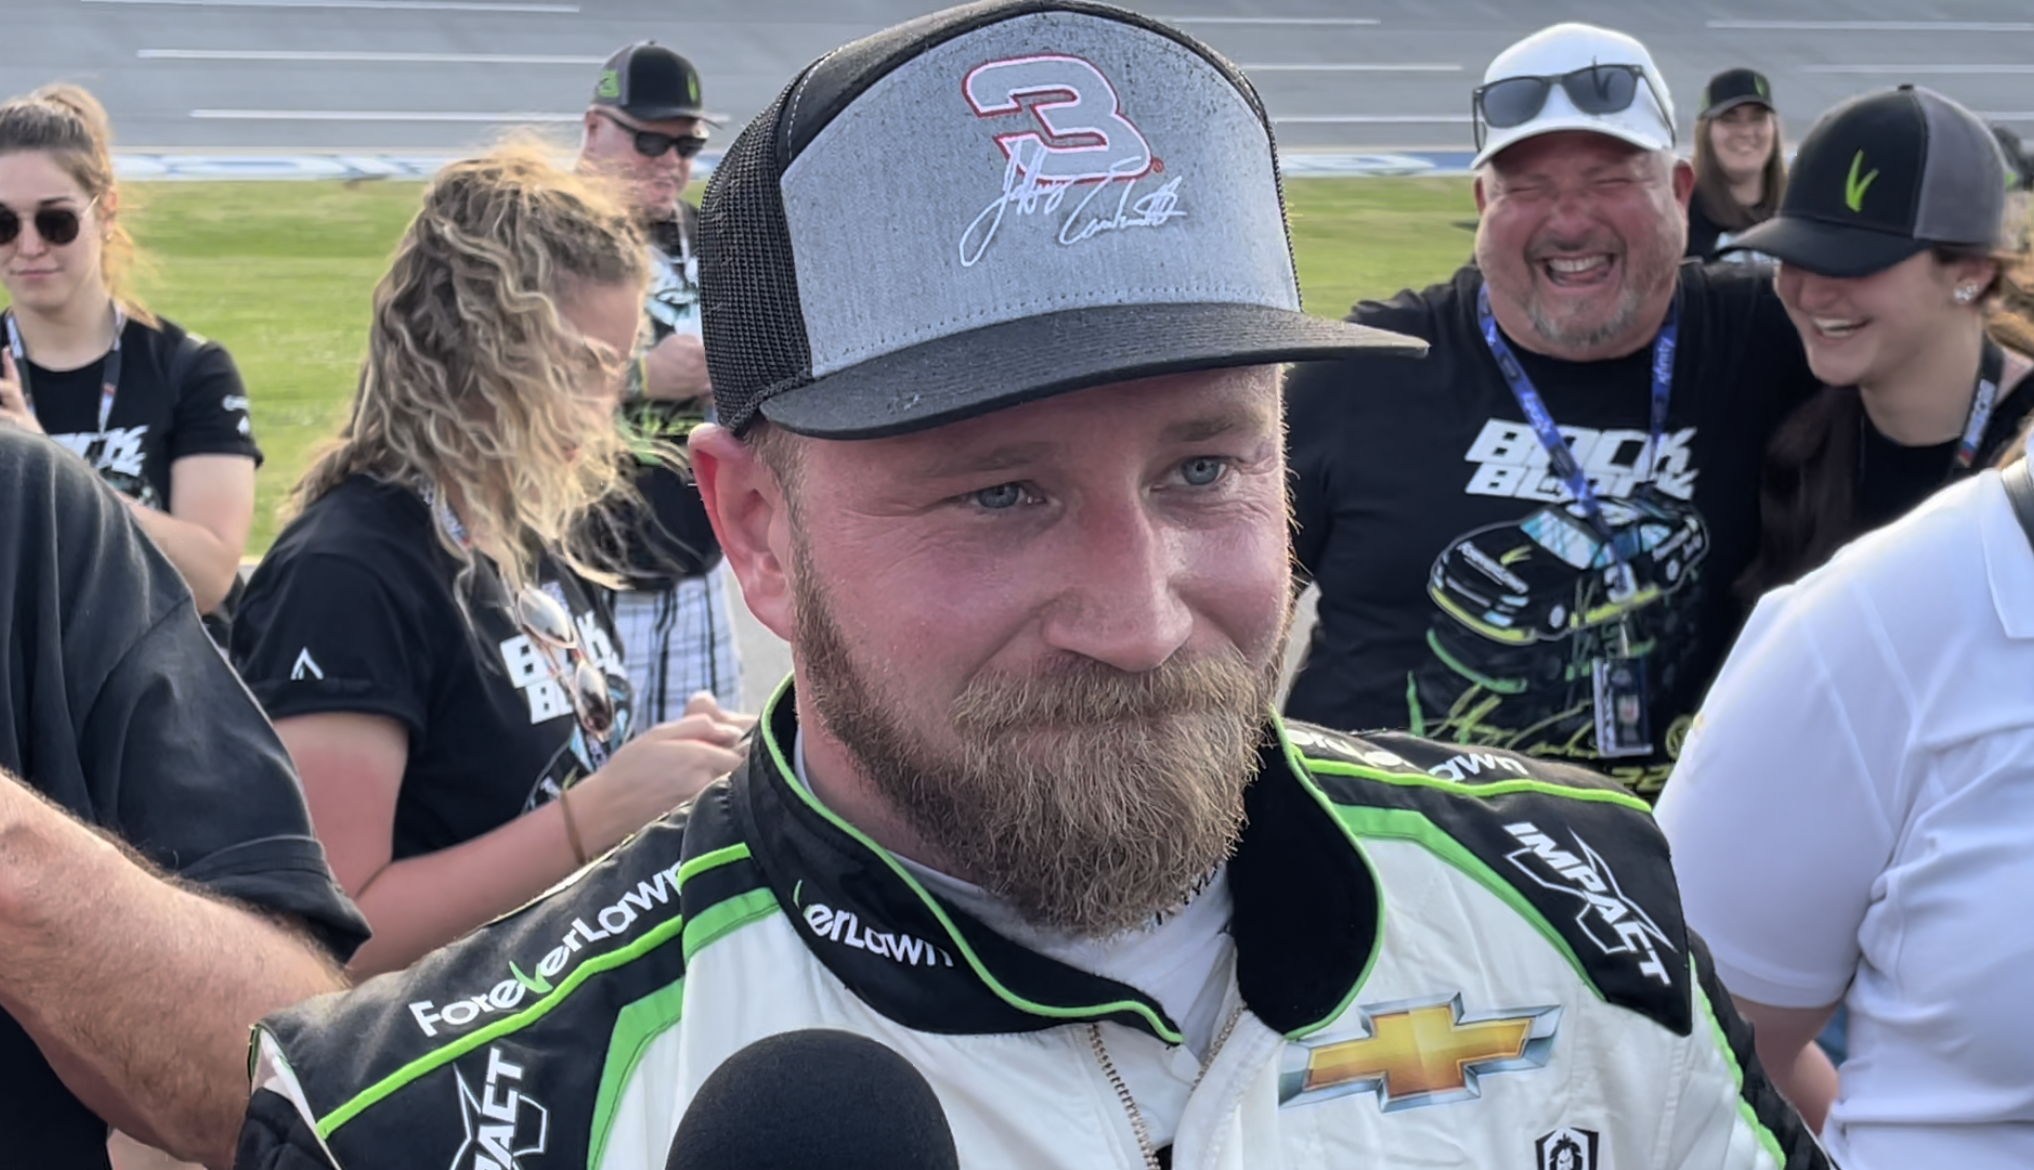 Jeffrey Earnhardt finishes second at Talladega in Richard Childress Racing No. 3 car